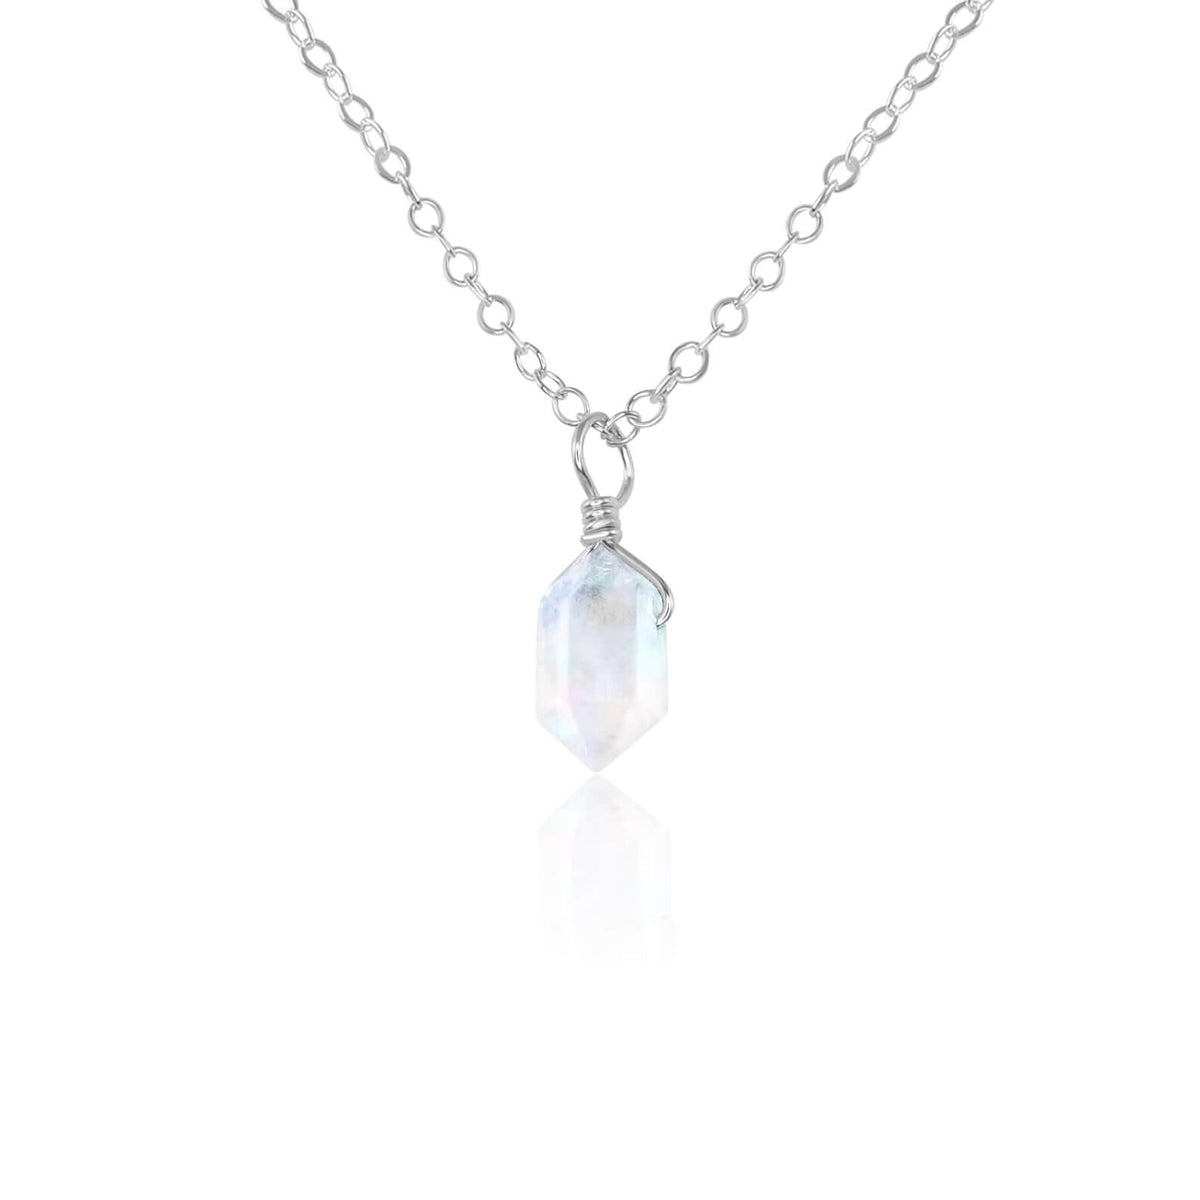 Double Terminated Crystal Pendant Necklace - Rainbow Moonstone - Sterling Silver - Luna Tide Handmade Jewellery